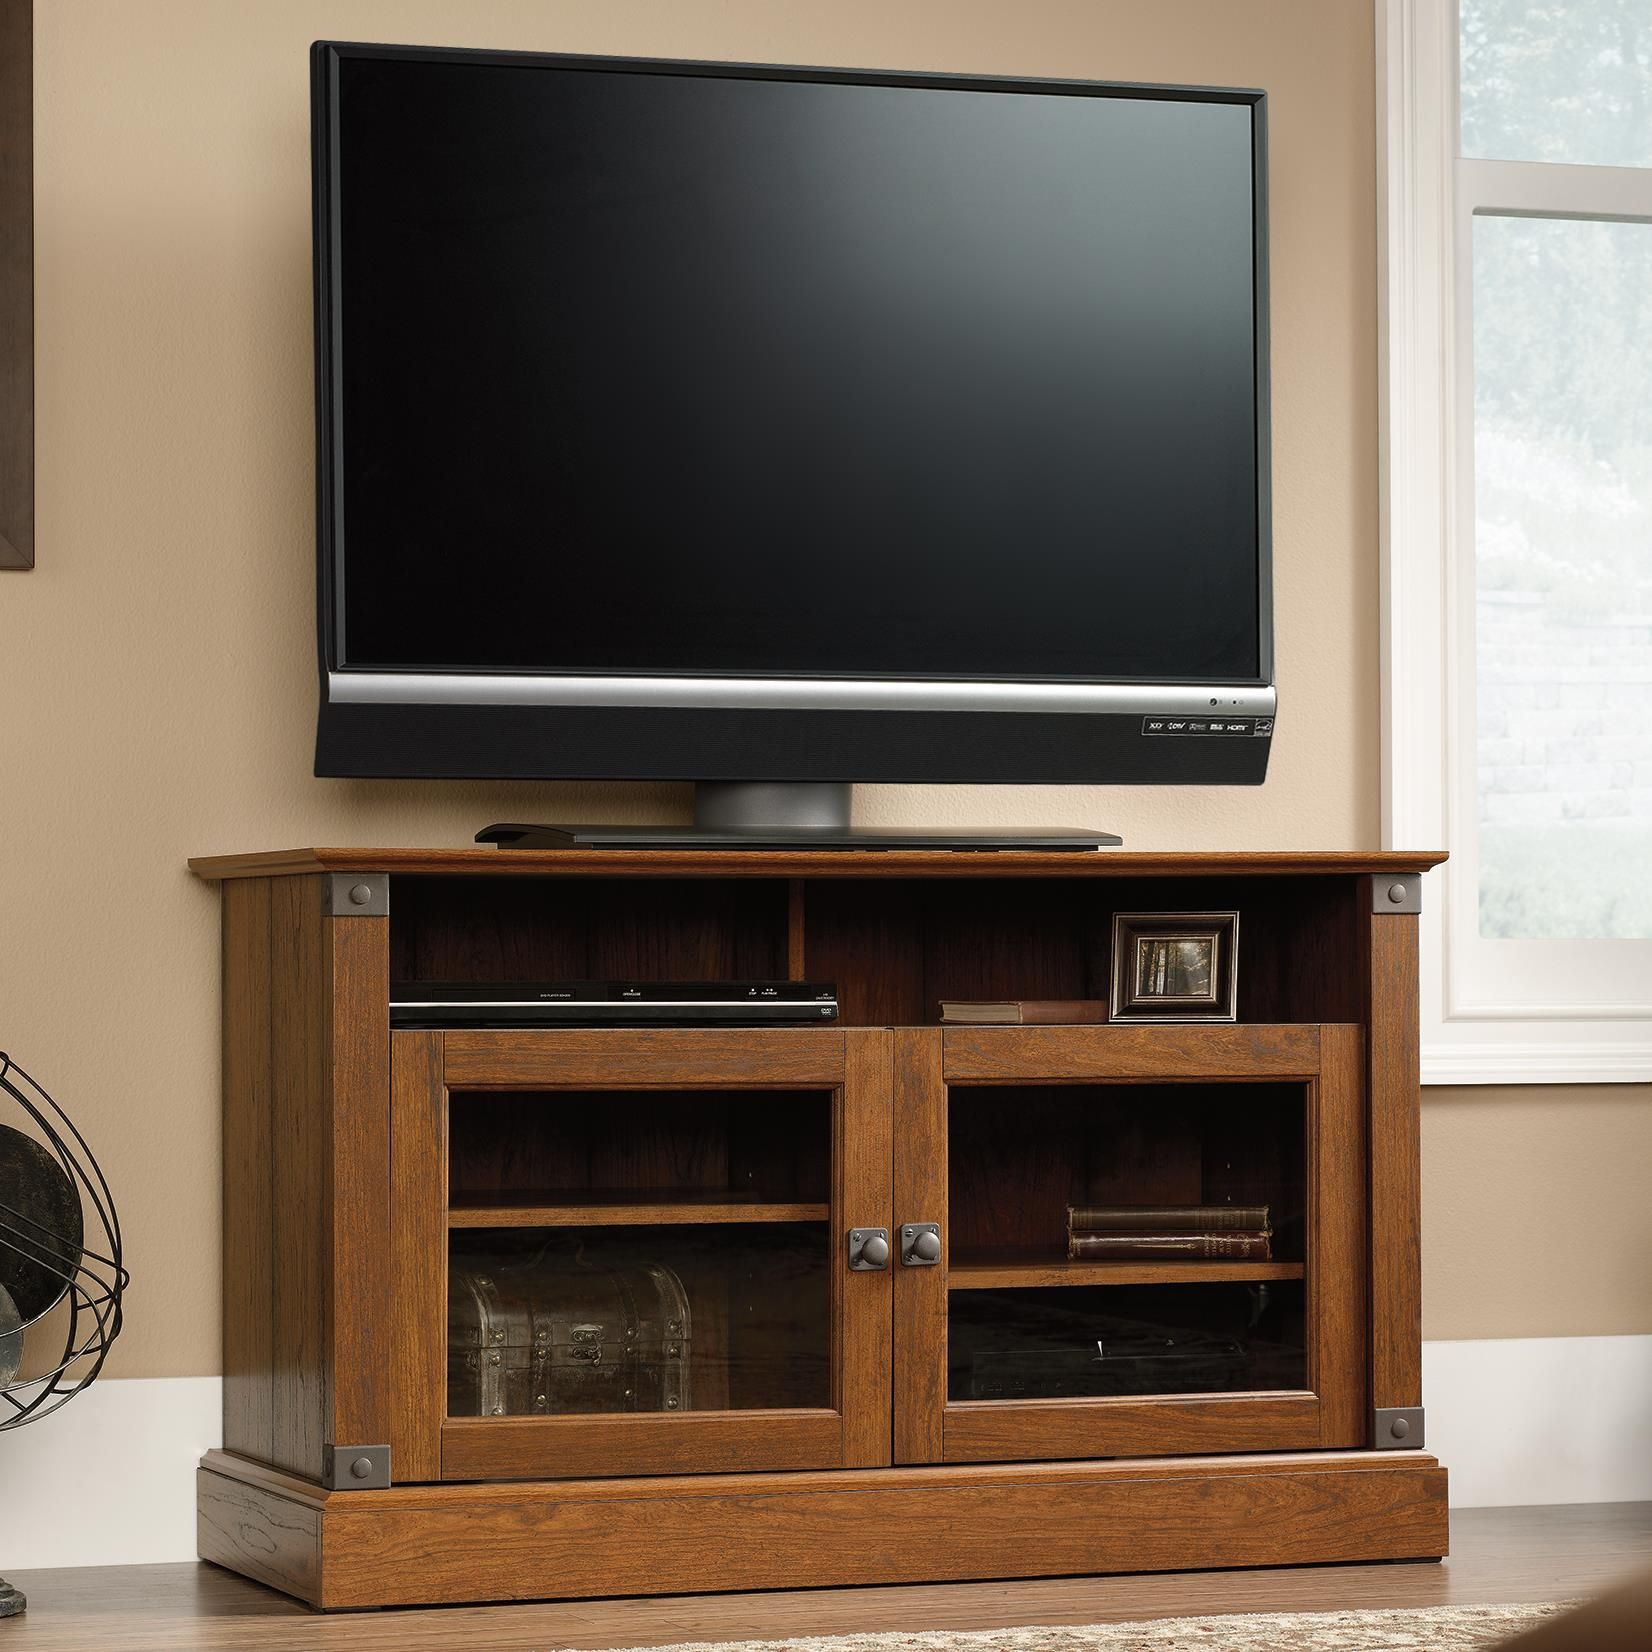 Sauder Carson Forge 412921 Rustic Style Panel Tv Stand Within Industrial Corner Tv Stands (View 11 of 15)